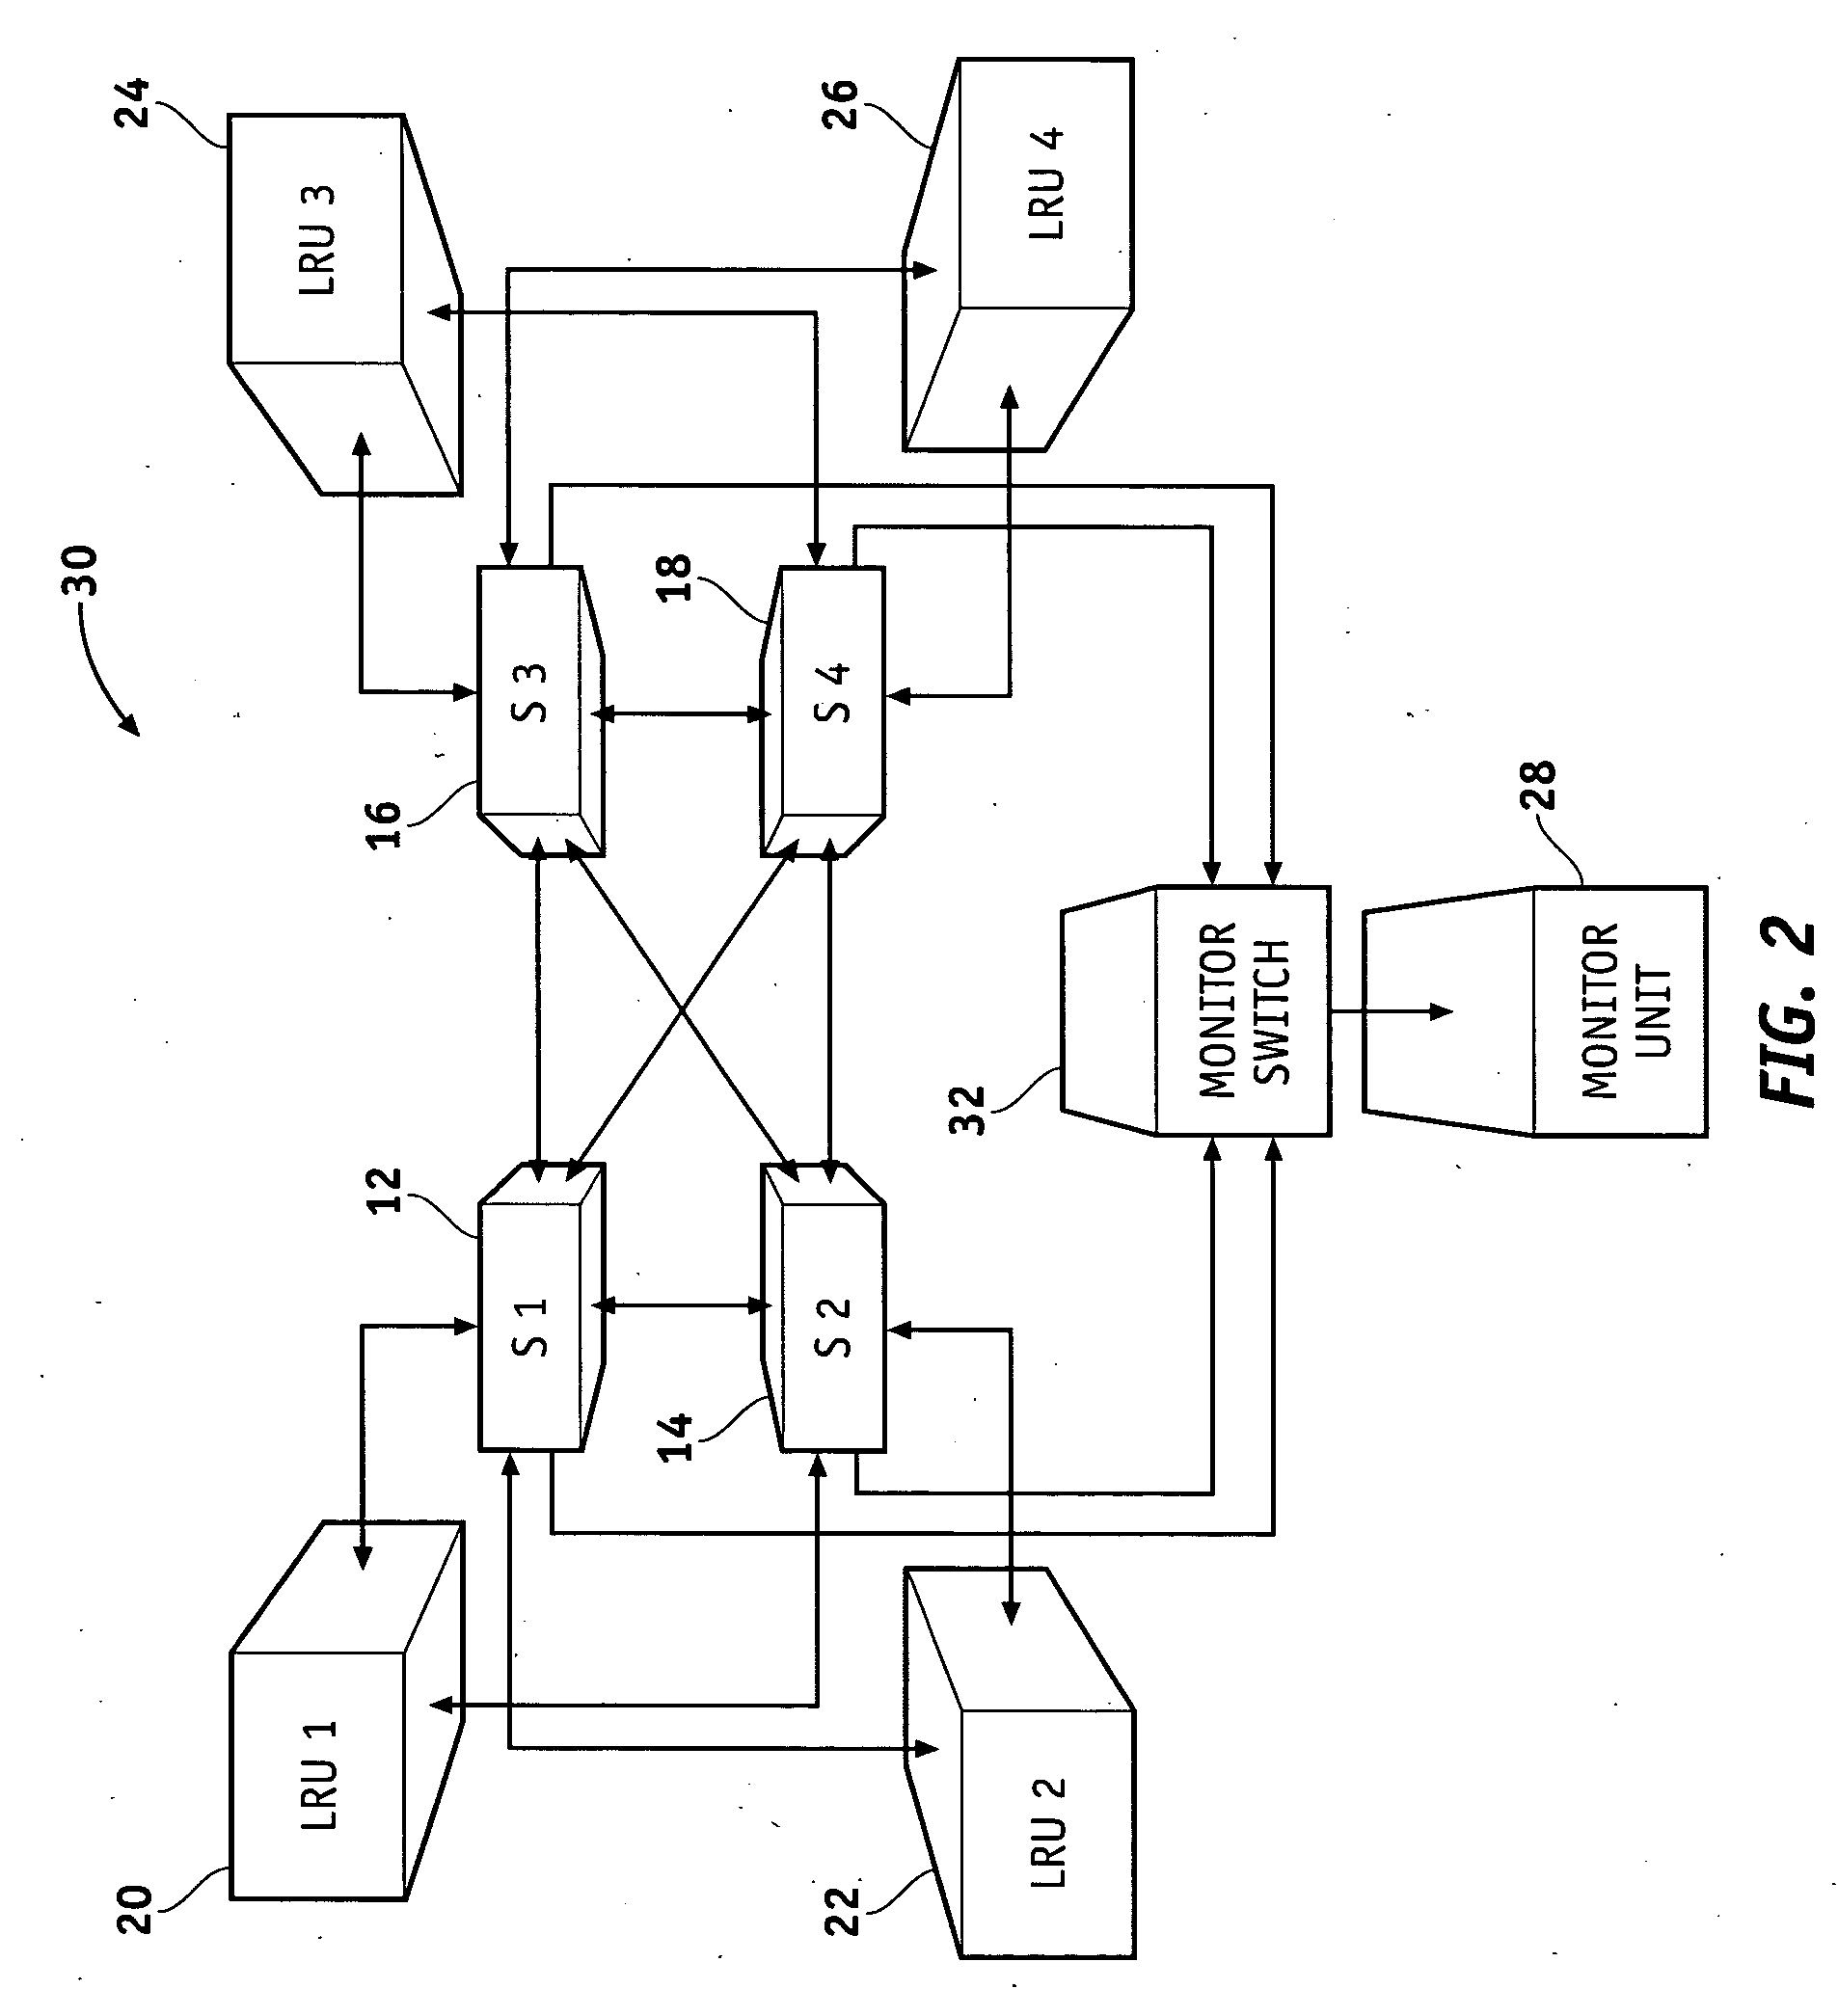 System and method for data collection in an avionics network